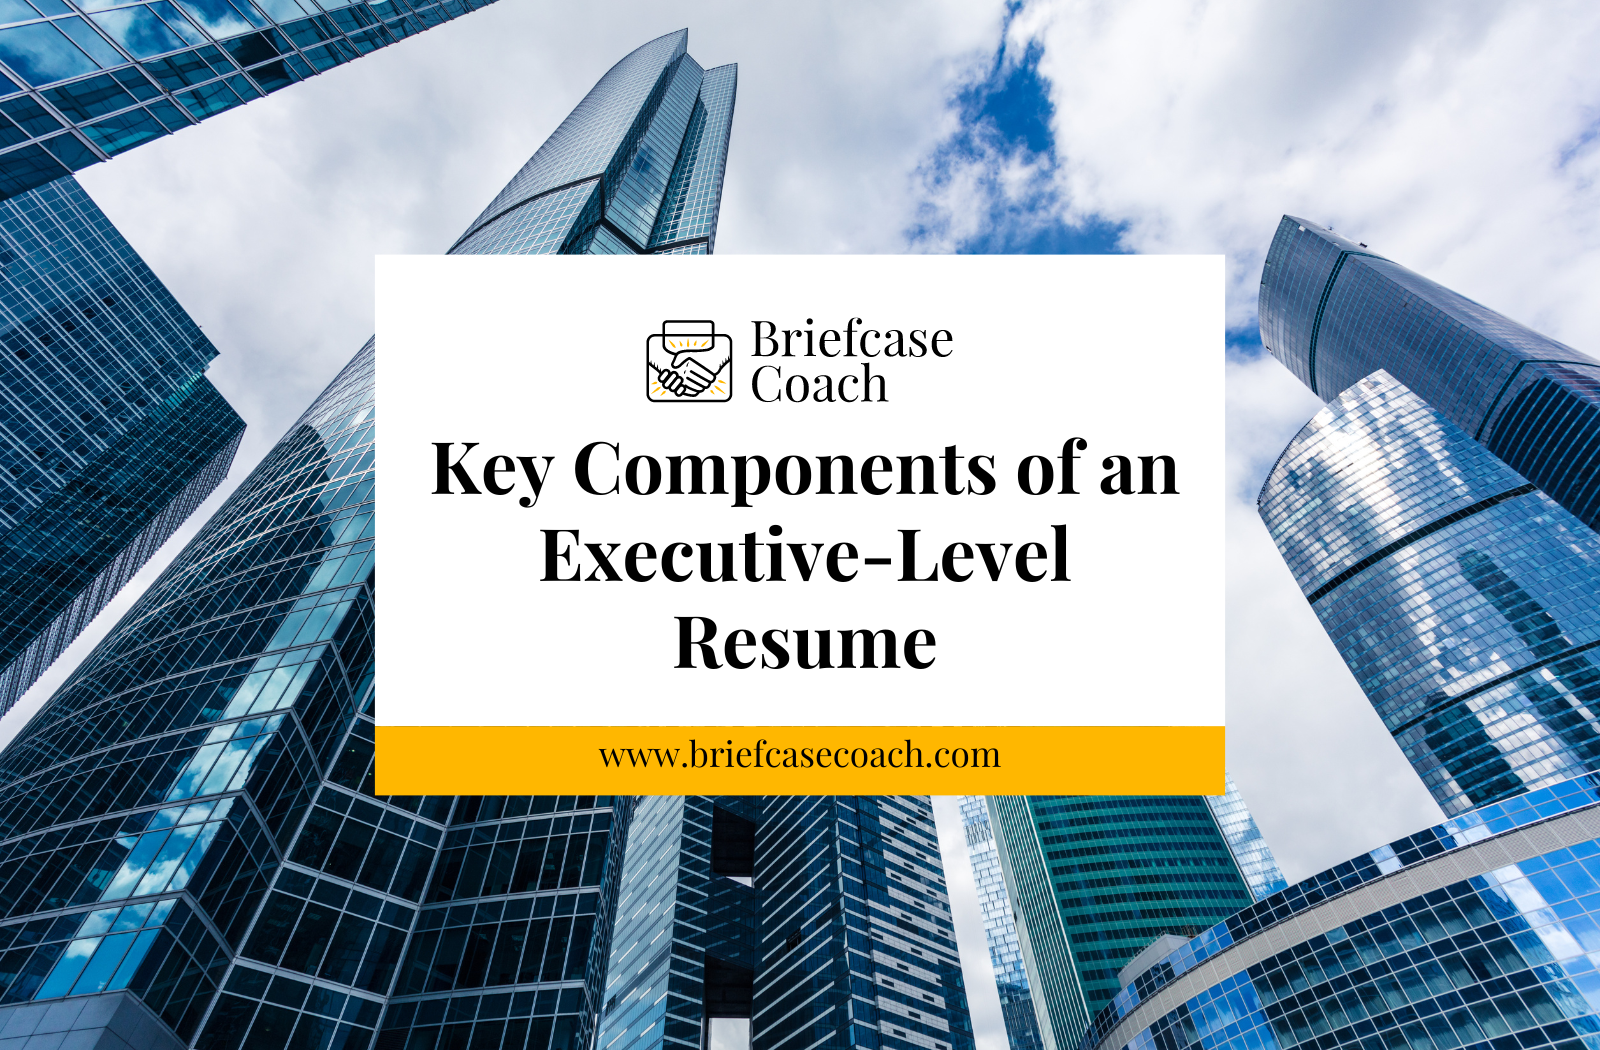 Key Components of an Executive-Level Resume